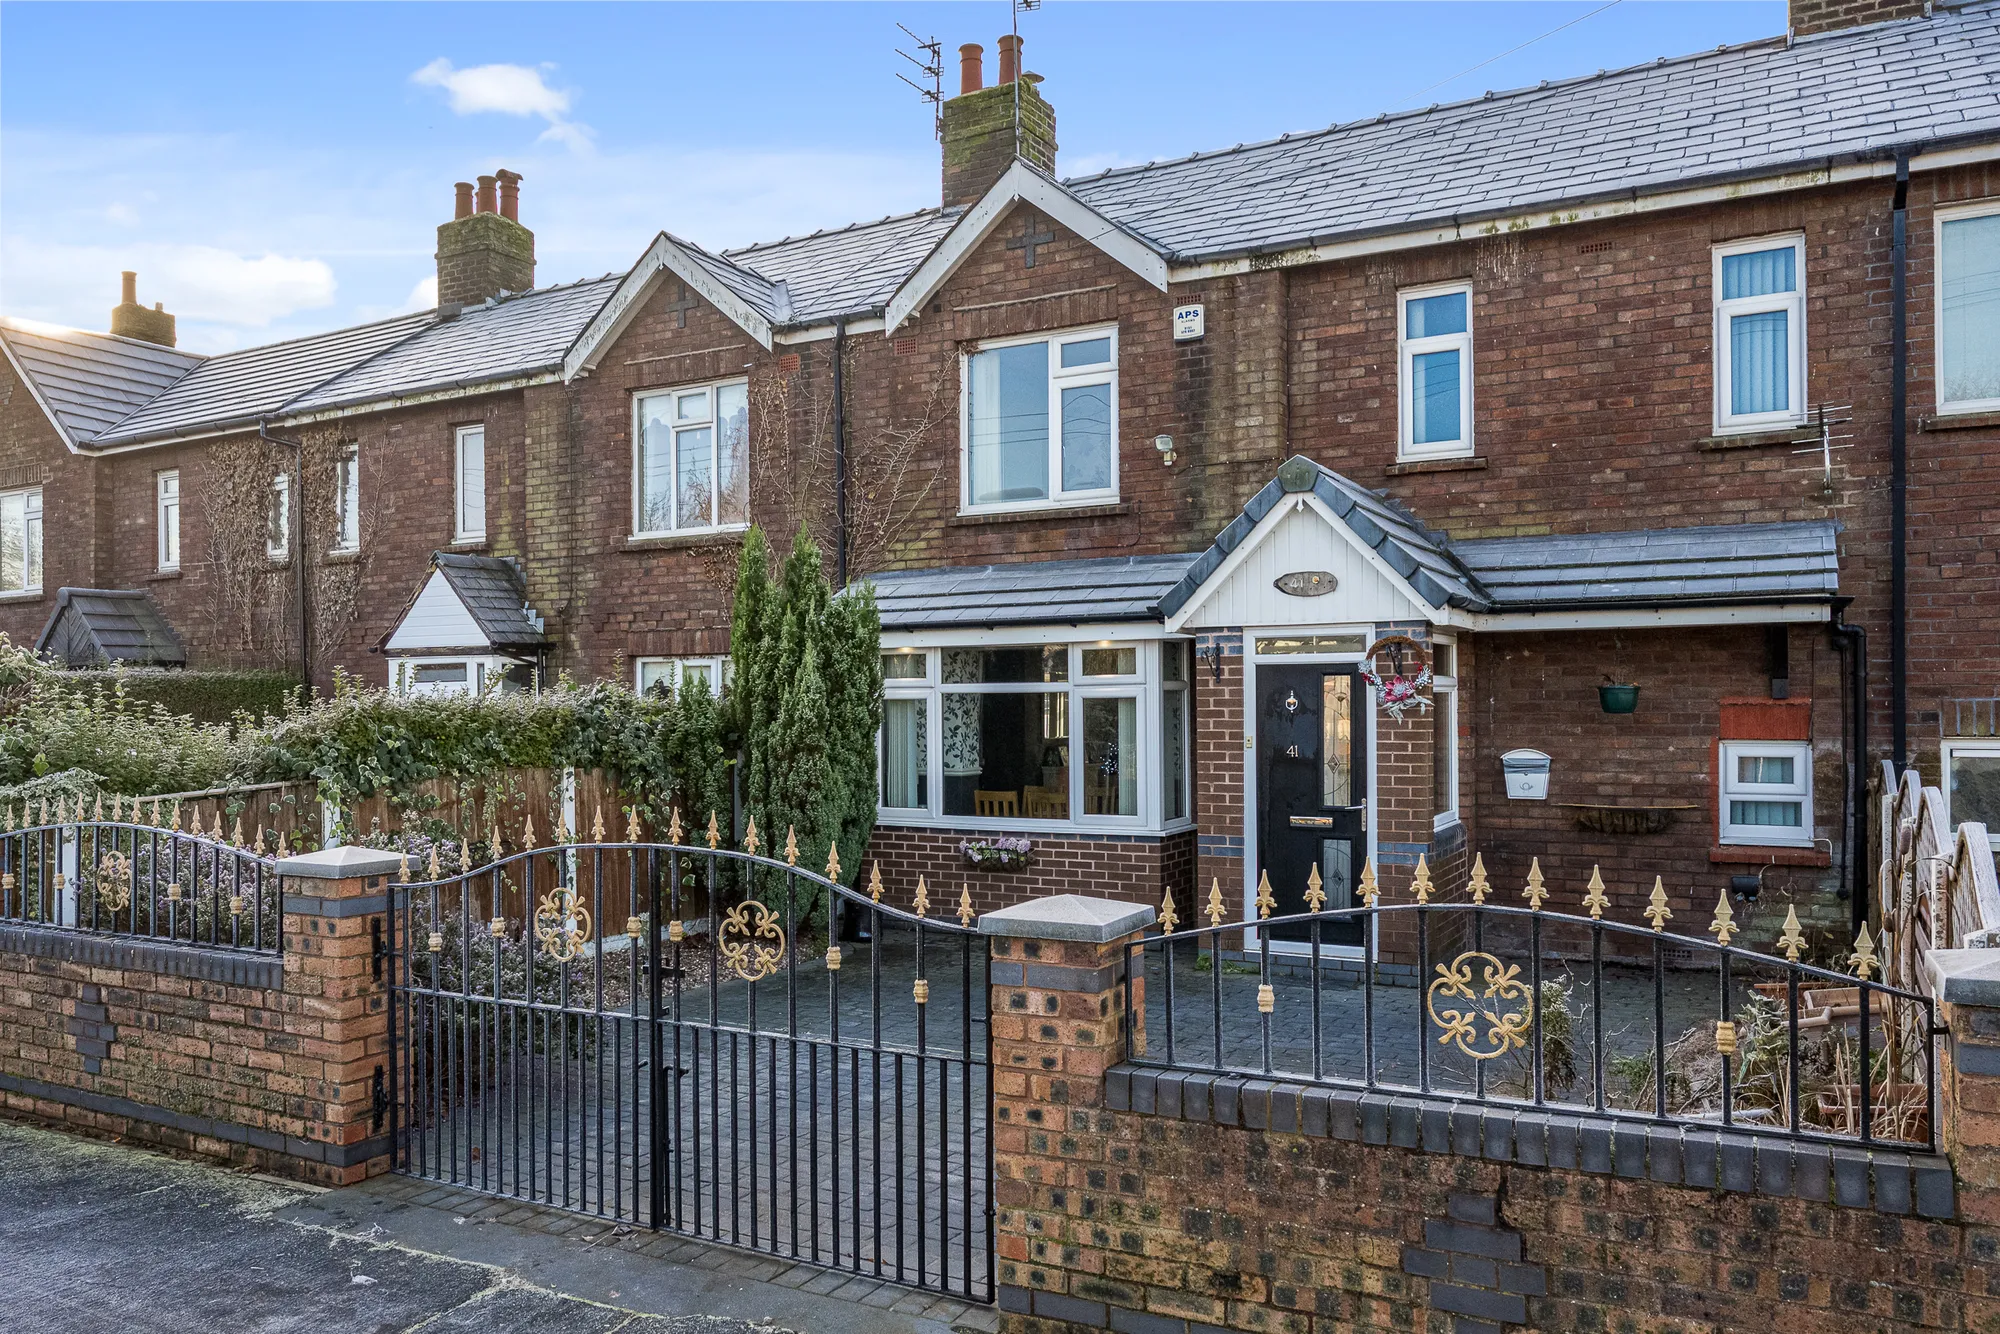 NO CHAIN!!! Presenting a truly enchanting and meticulously styled three-bedroom mid-terraced property, now gracing the market with the distinct advantage of a direct gateway to the picturesque Liverpool to Leeds canal, making it an irresistible allure for discerning buyers.